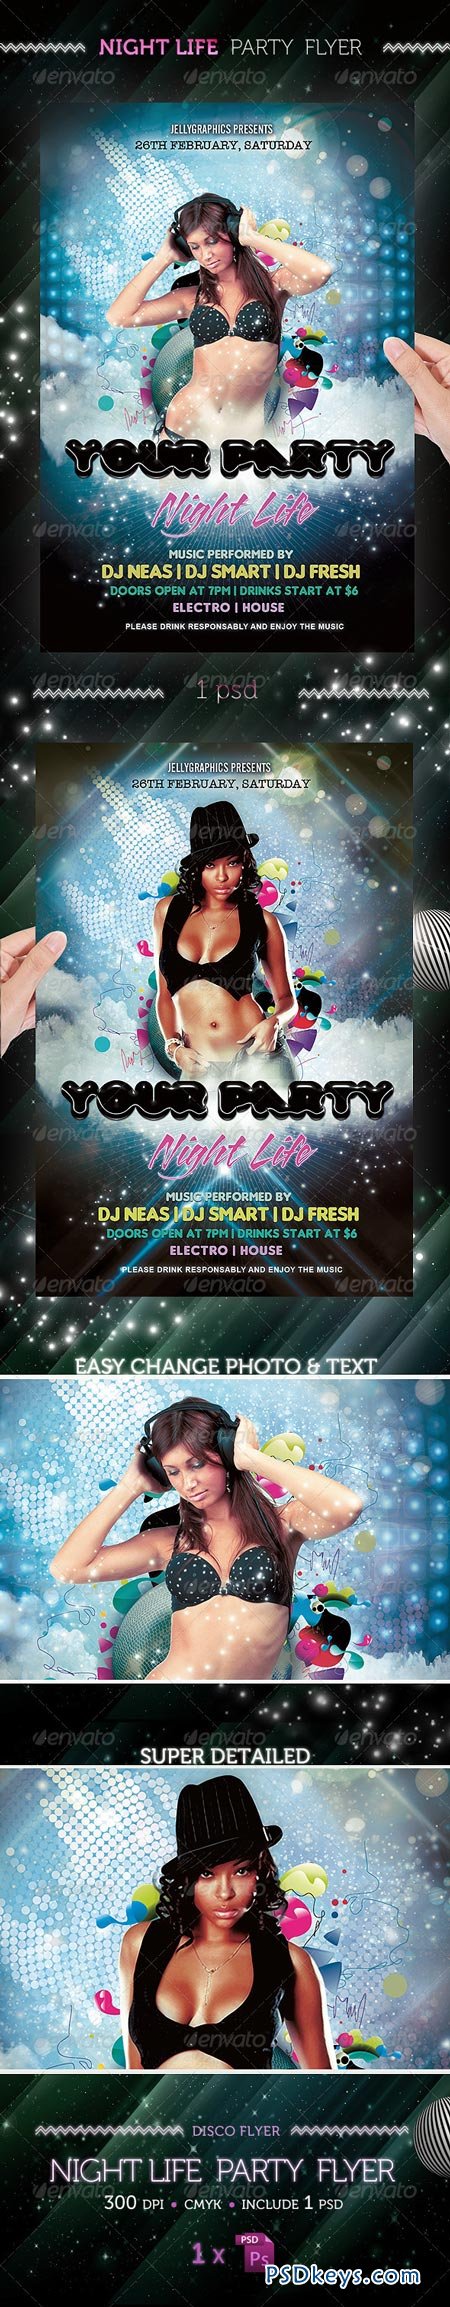 Nightlife Party Flyer Template 2303904